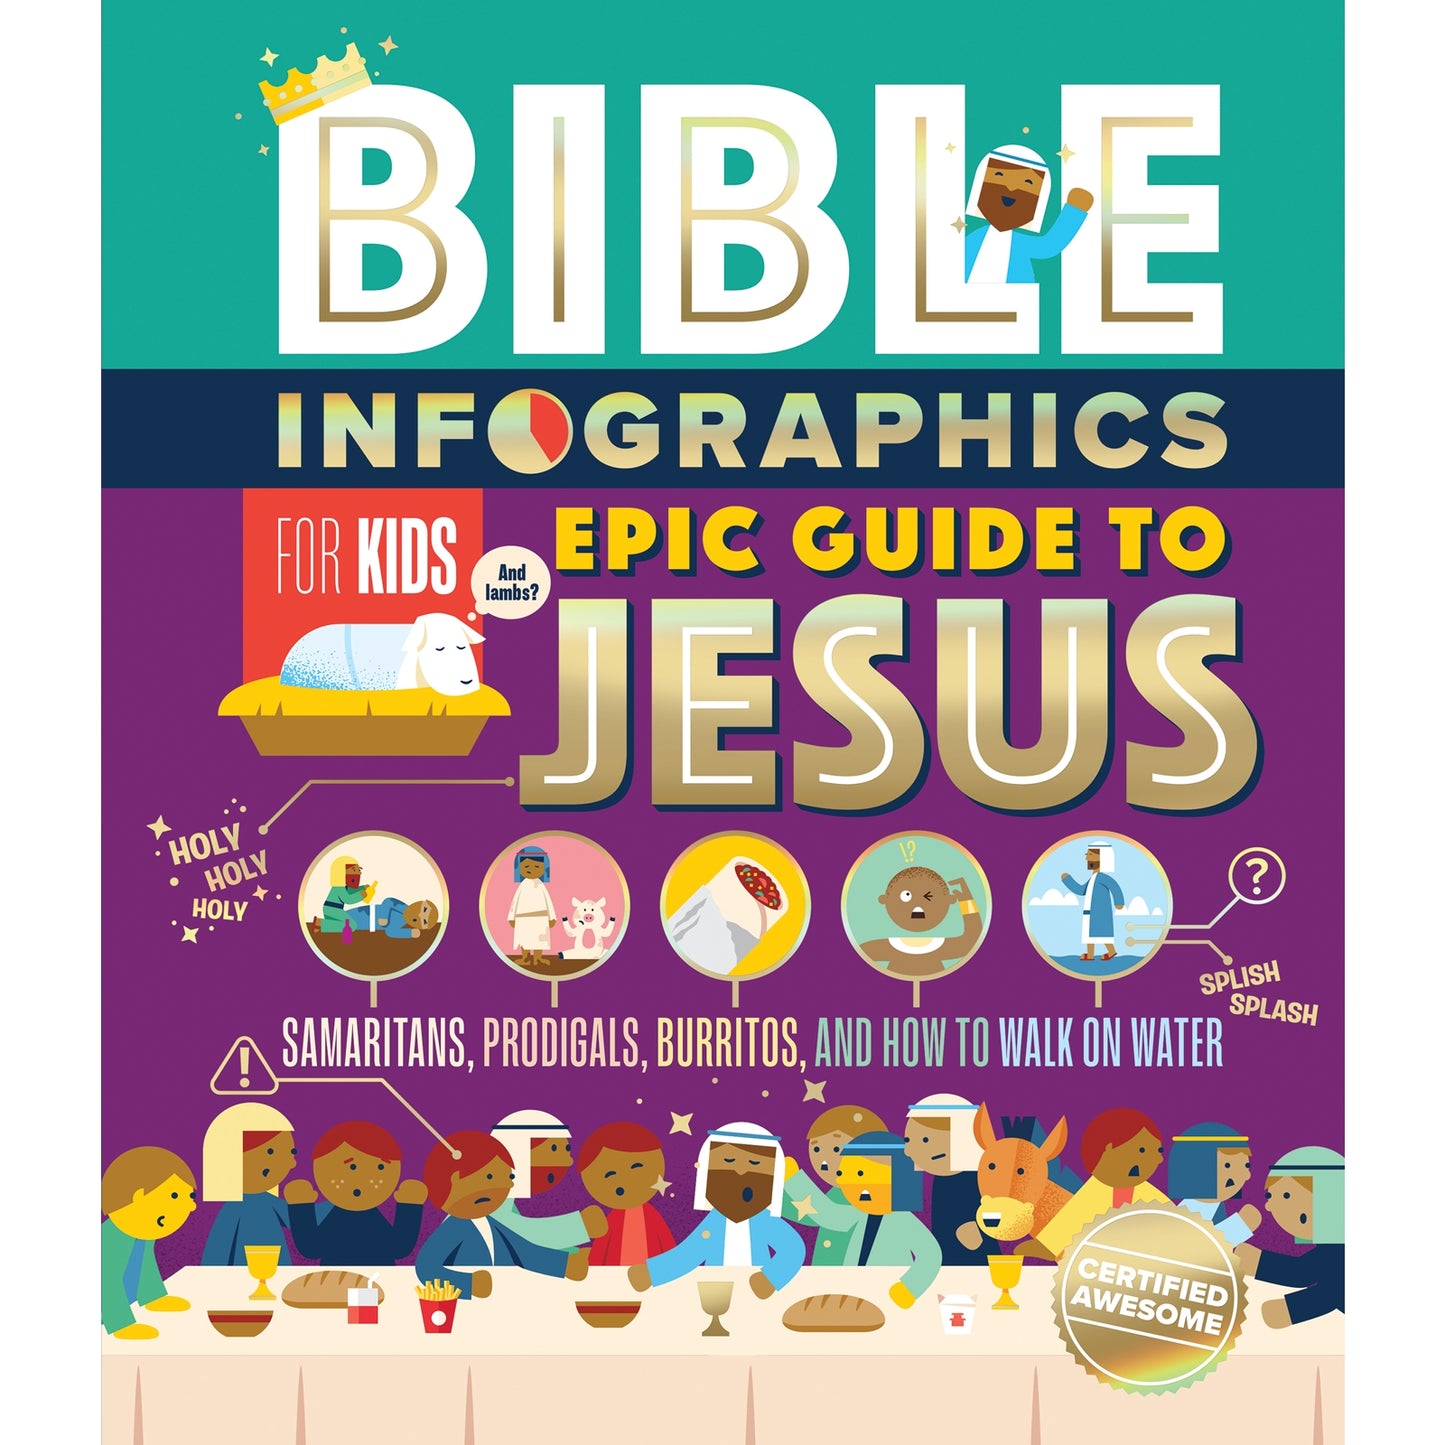 Bible Infographics for Kids: Epic Guide to Jesus, hardcover book